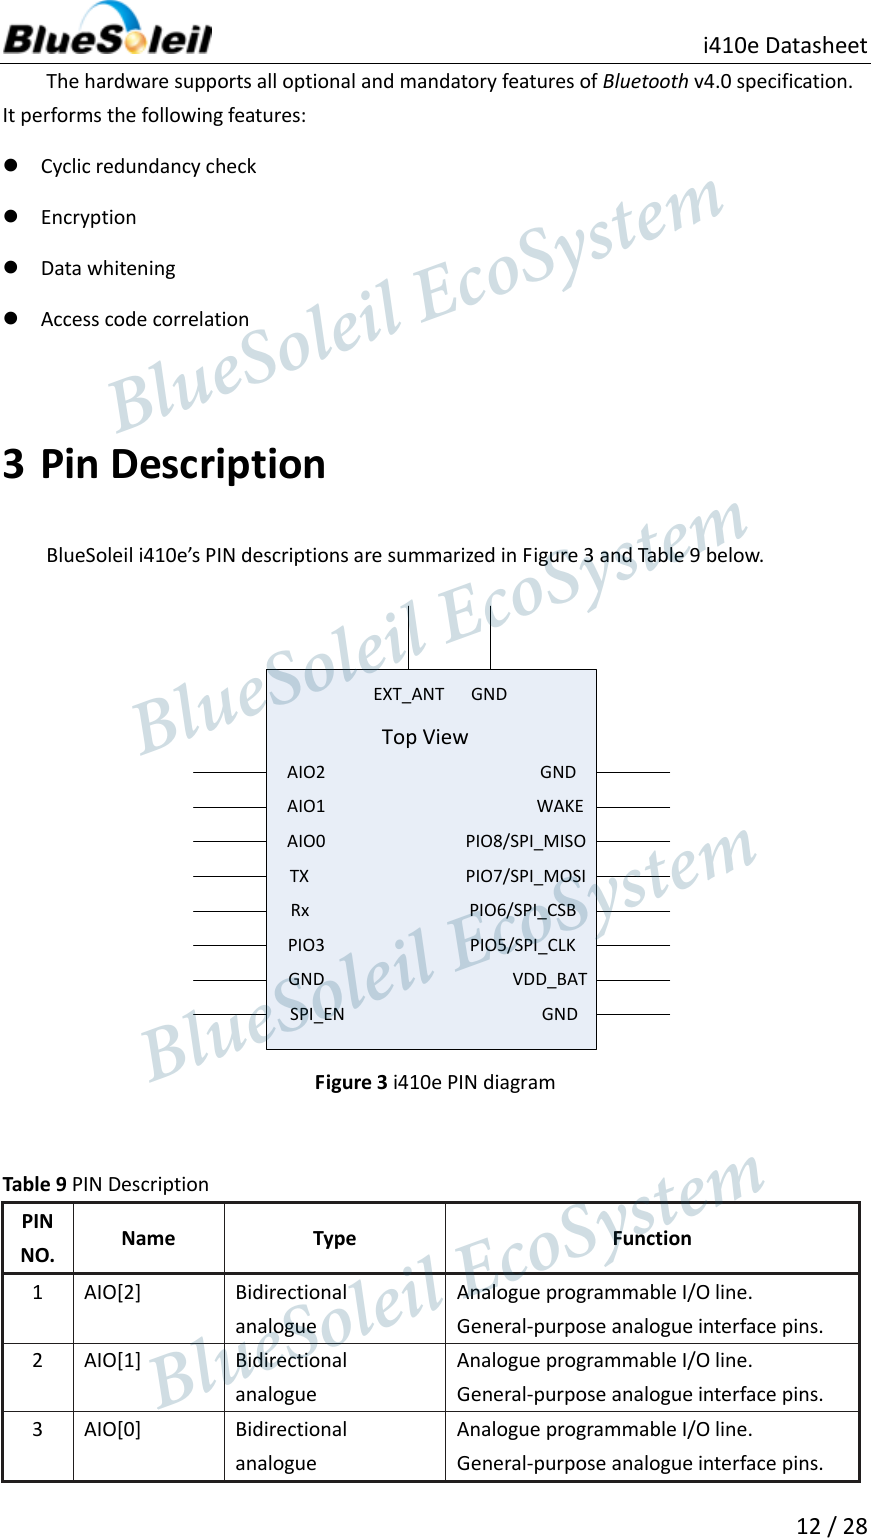                                               i410e Datasheet  12 / 28  The hardware supports all optional and mandatory features of Bluetooth v4.0 specification. It performs the following features:  Cyclic redundancy check  Encryption  Data whitening  Access code correlation  3 Pin Description BlueSoleil i410e’s PIN descriptions are summarized in Figure 3 and Table 9 below. AIO2AIO1AIO0TXRxPIO3GNDSPI_EN GNDVDD_BATPIO5/SPI_CLKPIO6/SPI_CSBPIO7/SPI_MOSIPIO8/SPI_MISOWAKEGNDTop ViewGNDEXT_ANT Figure 3 i410e PIN diagram  Table 9 PIN Description PIN NO. Name Type Function 1 AIO[2] Bidirectional analogue Analogue programmable I/O line. General-purpose analogue interface pins. 2 AIO[1] Bidirectional analogue Analogue programmable I/O line. General-purpose analogue interface pins. 3 AIO[0] Bidirectional analogue Analogue programmable I/O line. General-purpose analogue interface pins.                  BlueSoleil EcoSystem            BlueSoleil EcoSystem      BlueSoleil EcoSystemBlueSoleil EcoSystem